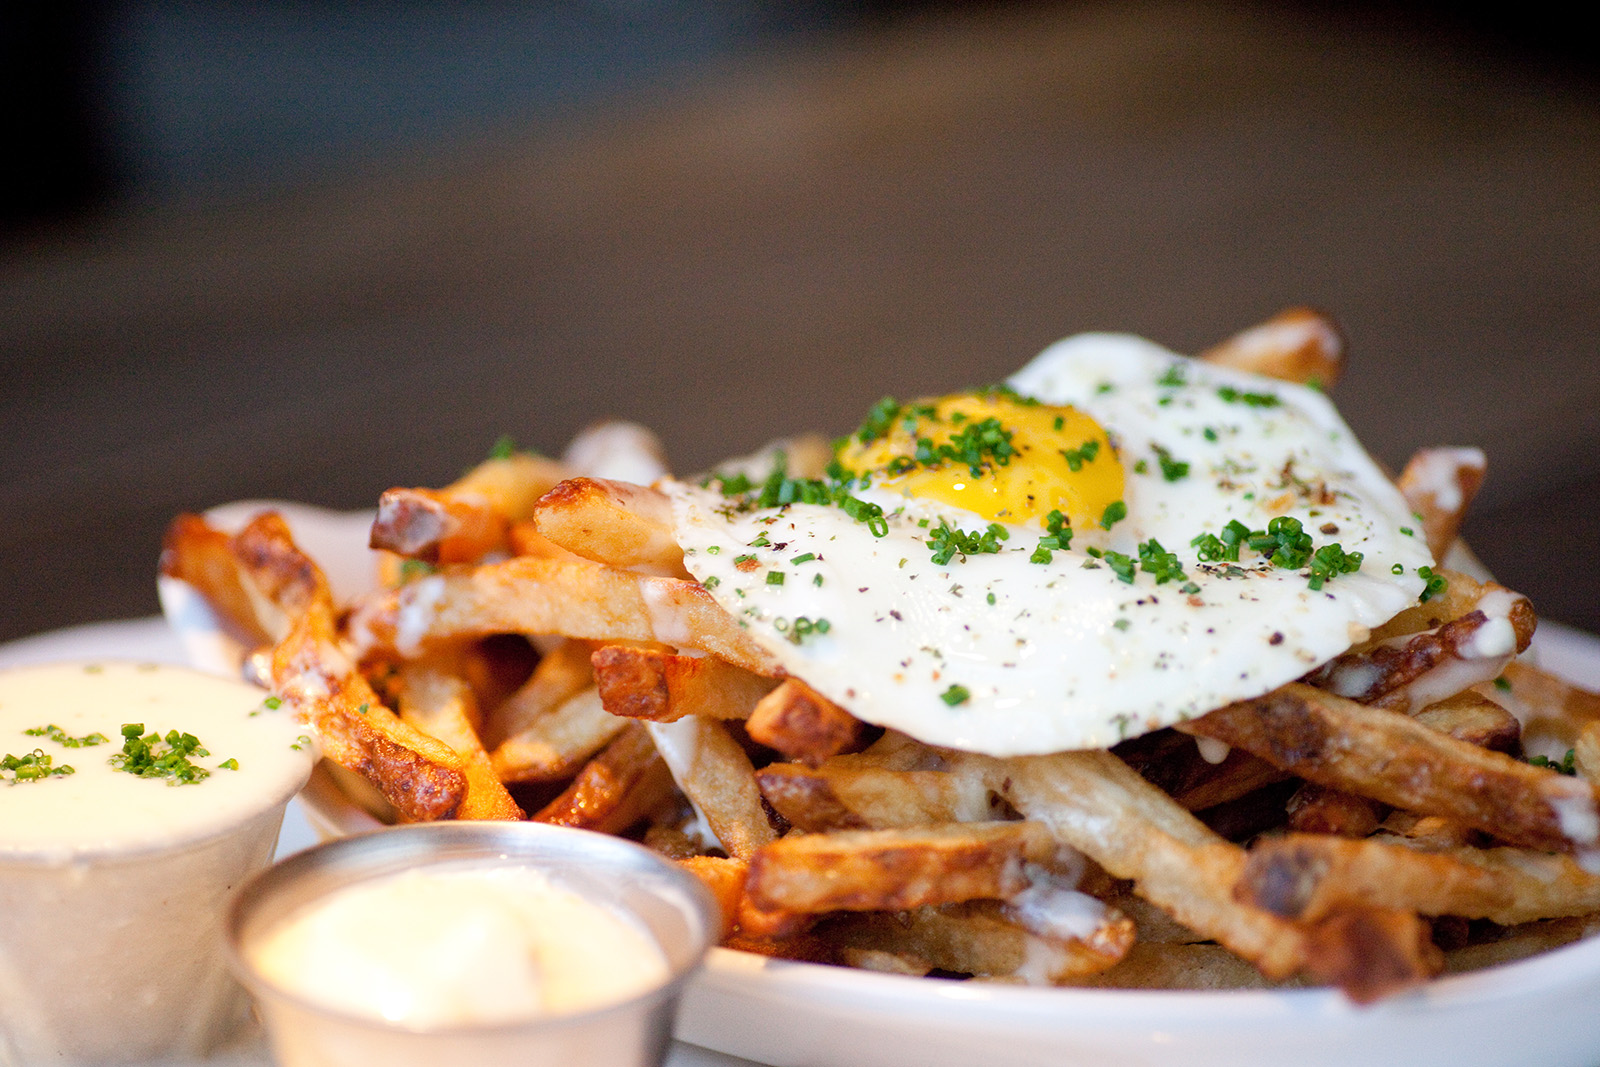 Fries and Eggs